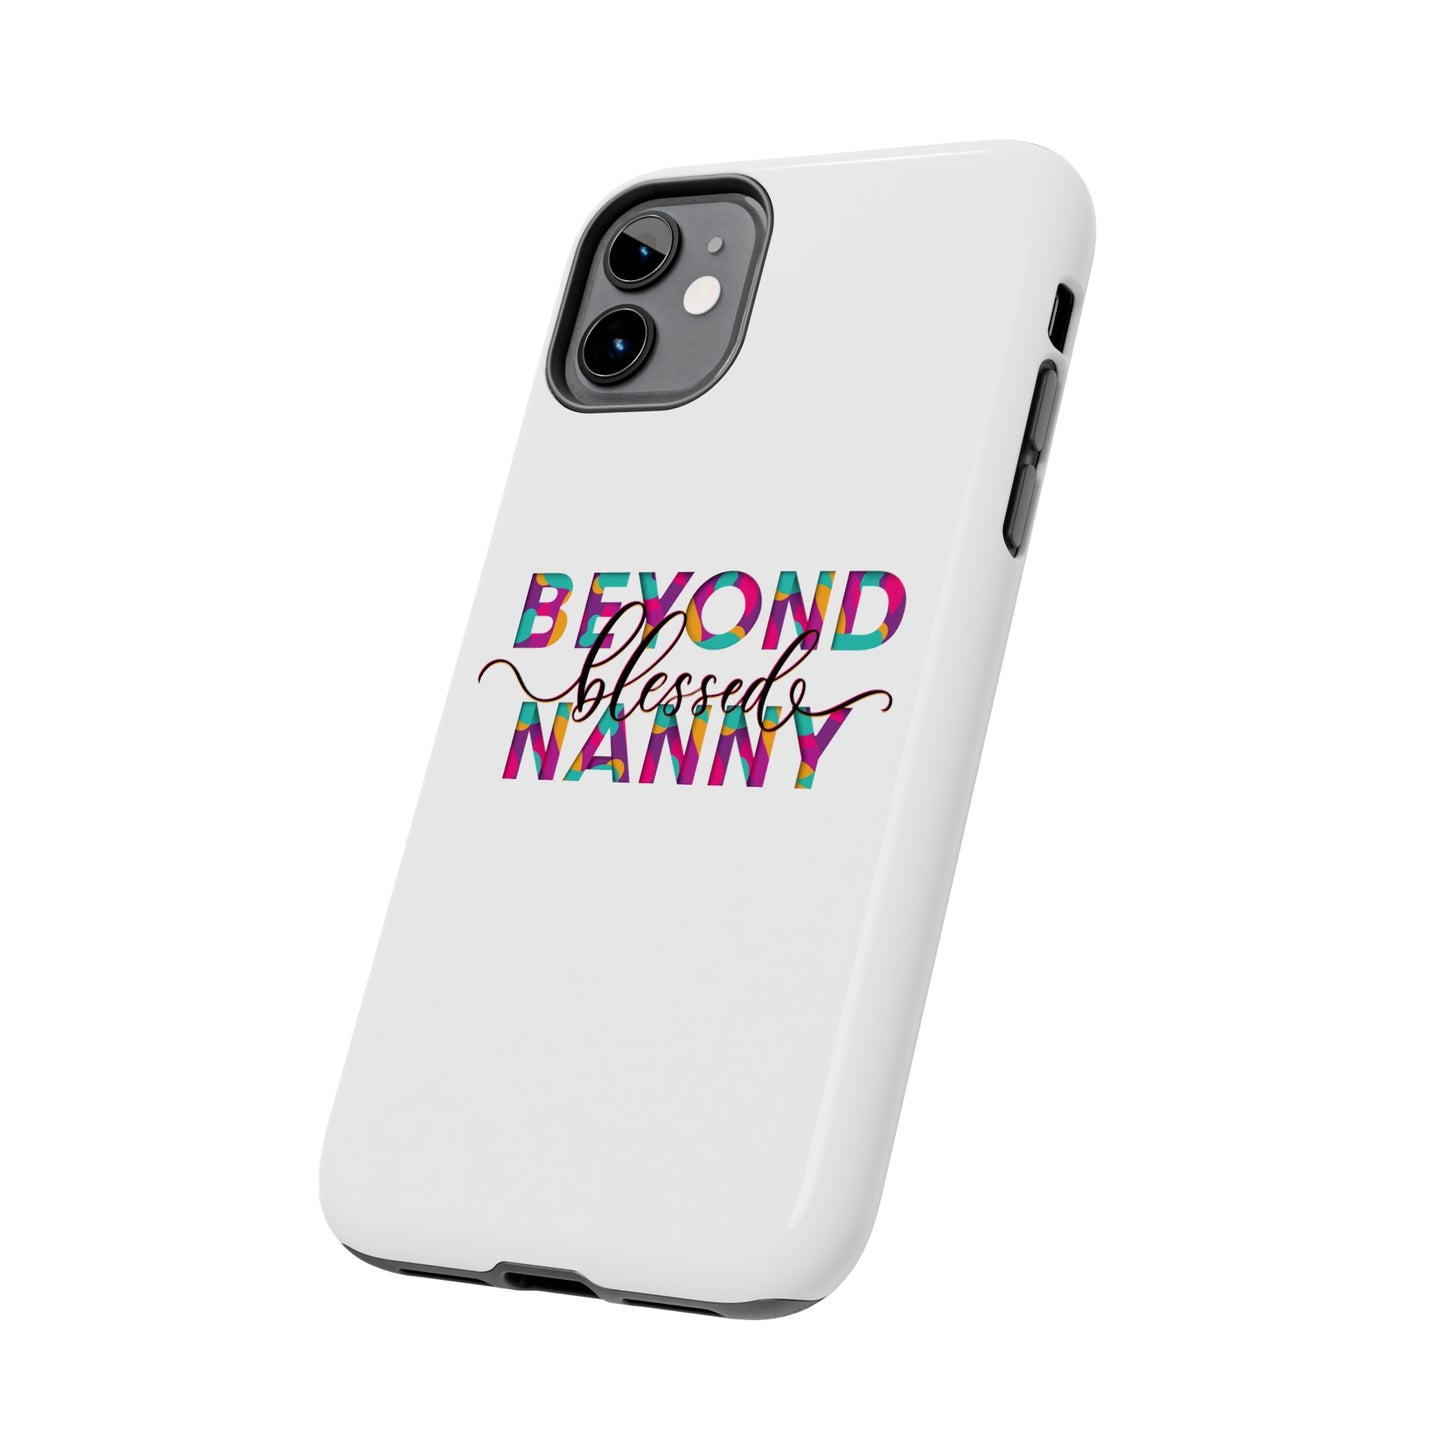 Beyond Blessed Nanny - Fun -  Tough Phone Cases